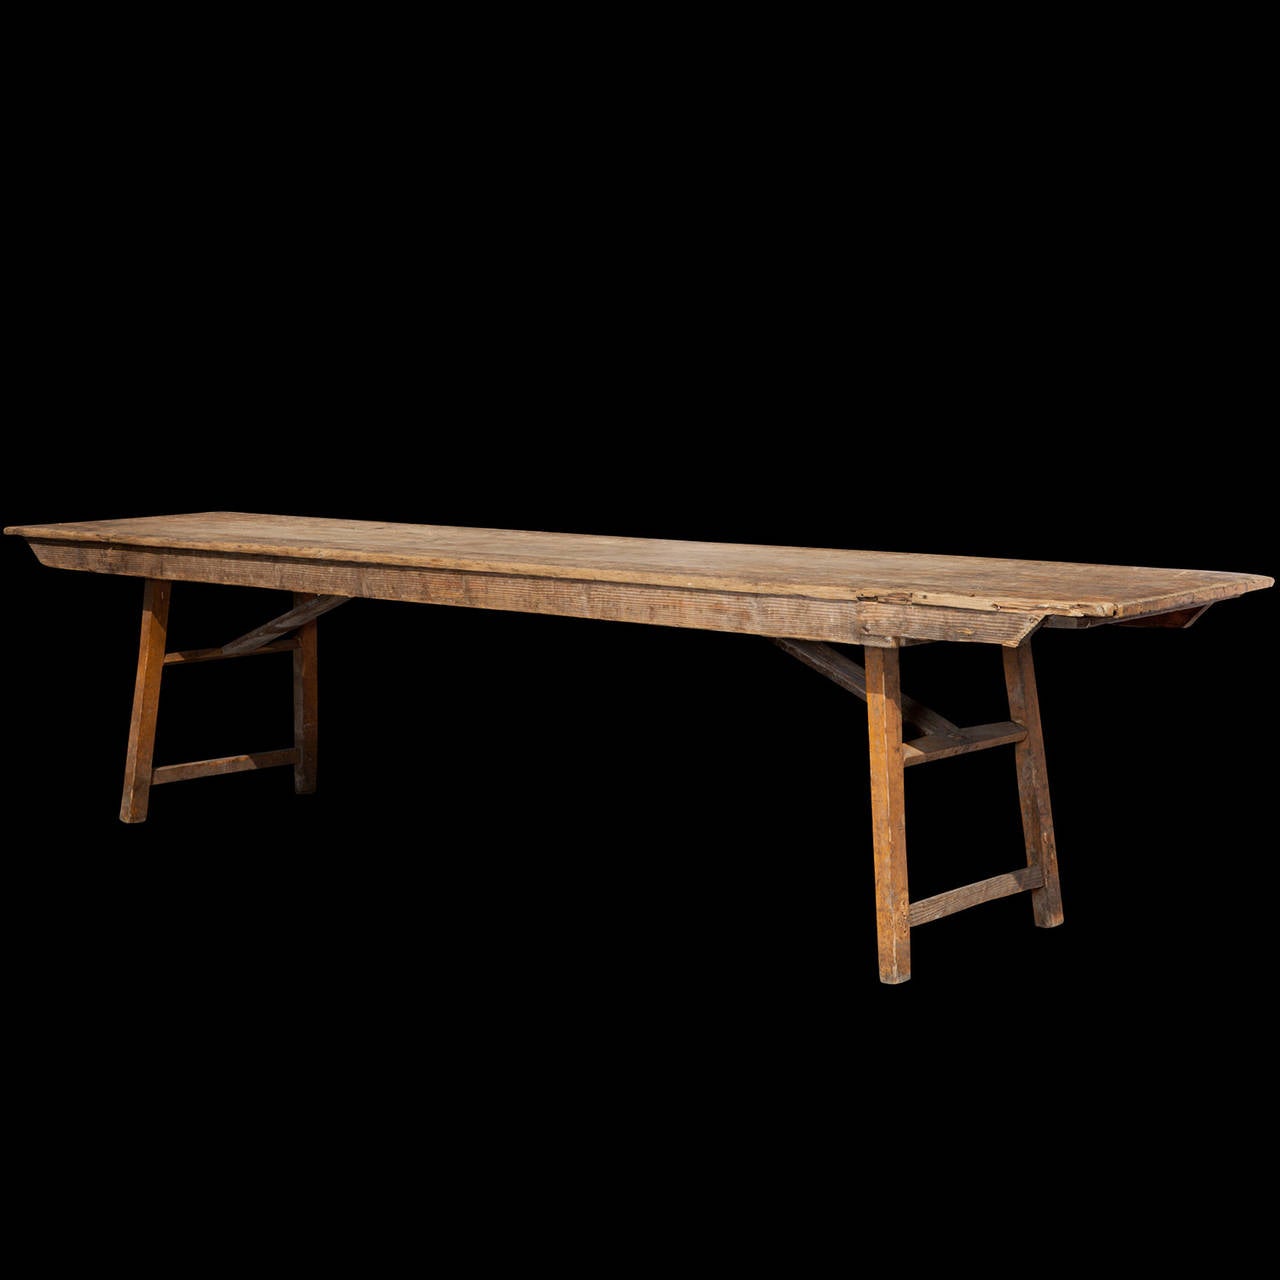 Solid pine harvest table, with folding legs.

Made in Italy circa 1910.